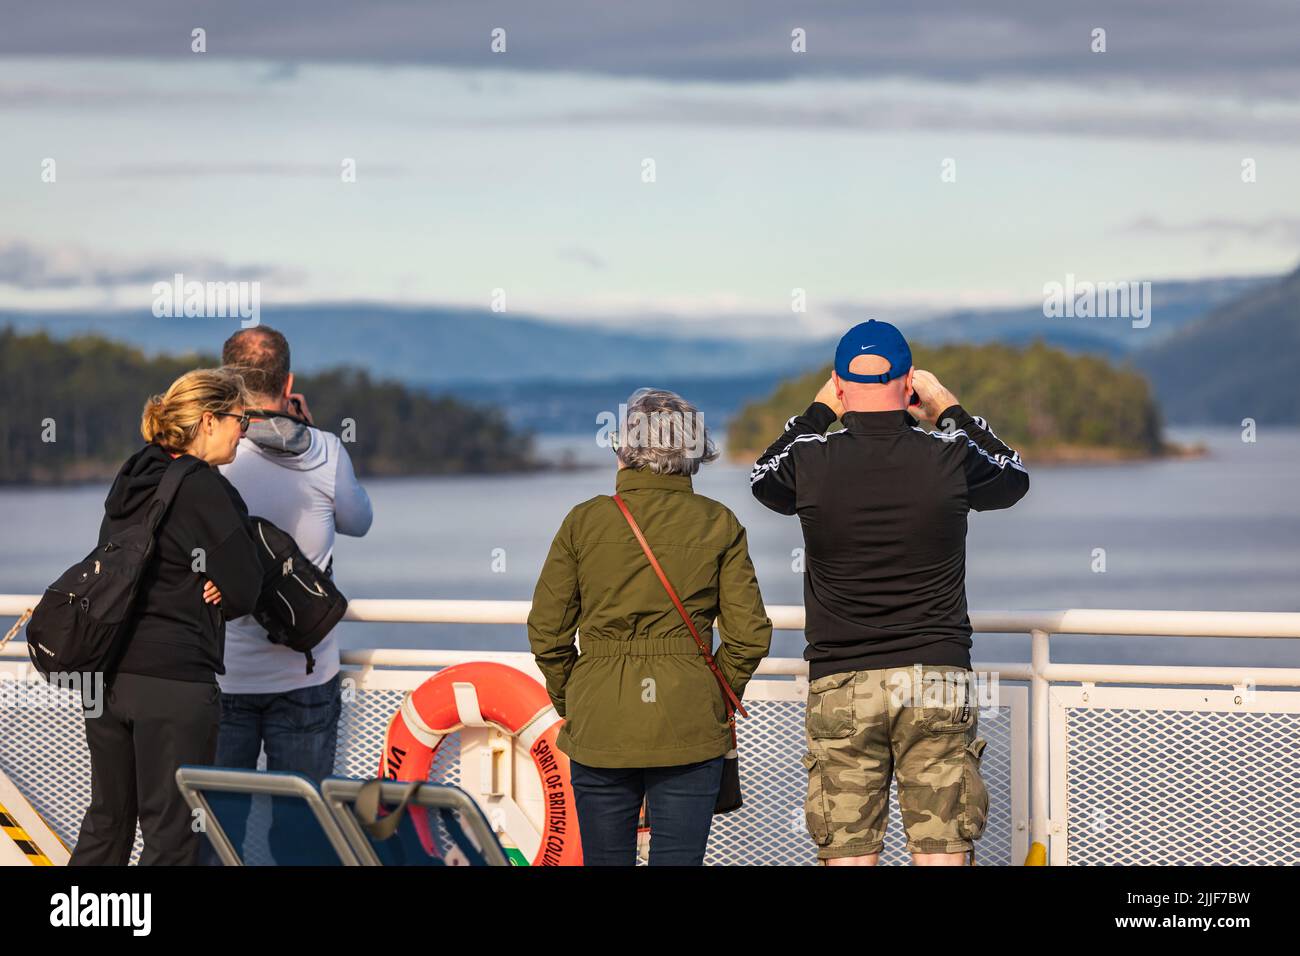 People on a ferry looking into the distance. Passengers on excursion ship or ferry on holiday boat trip in tourism, vacation travel concept. Copy spac Stock Photo